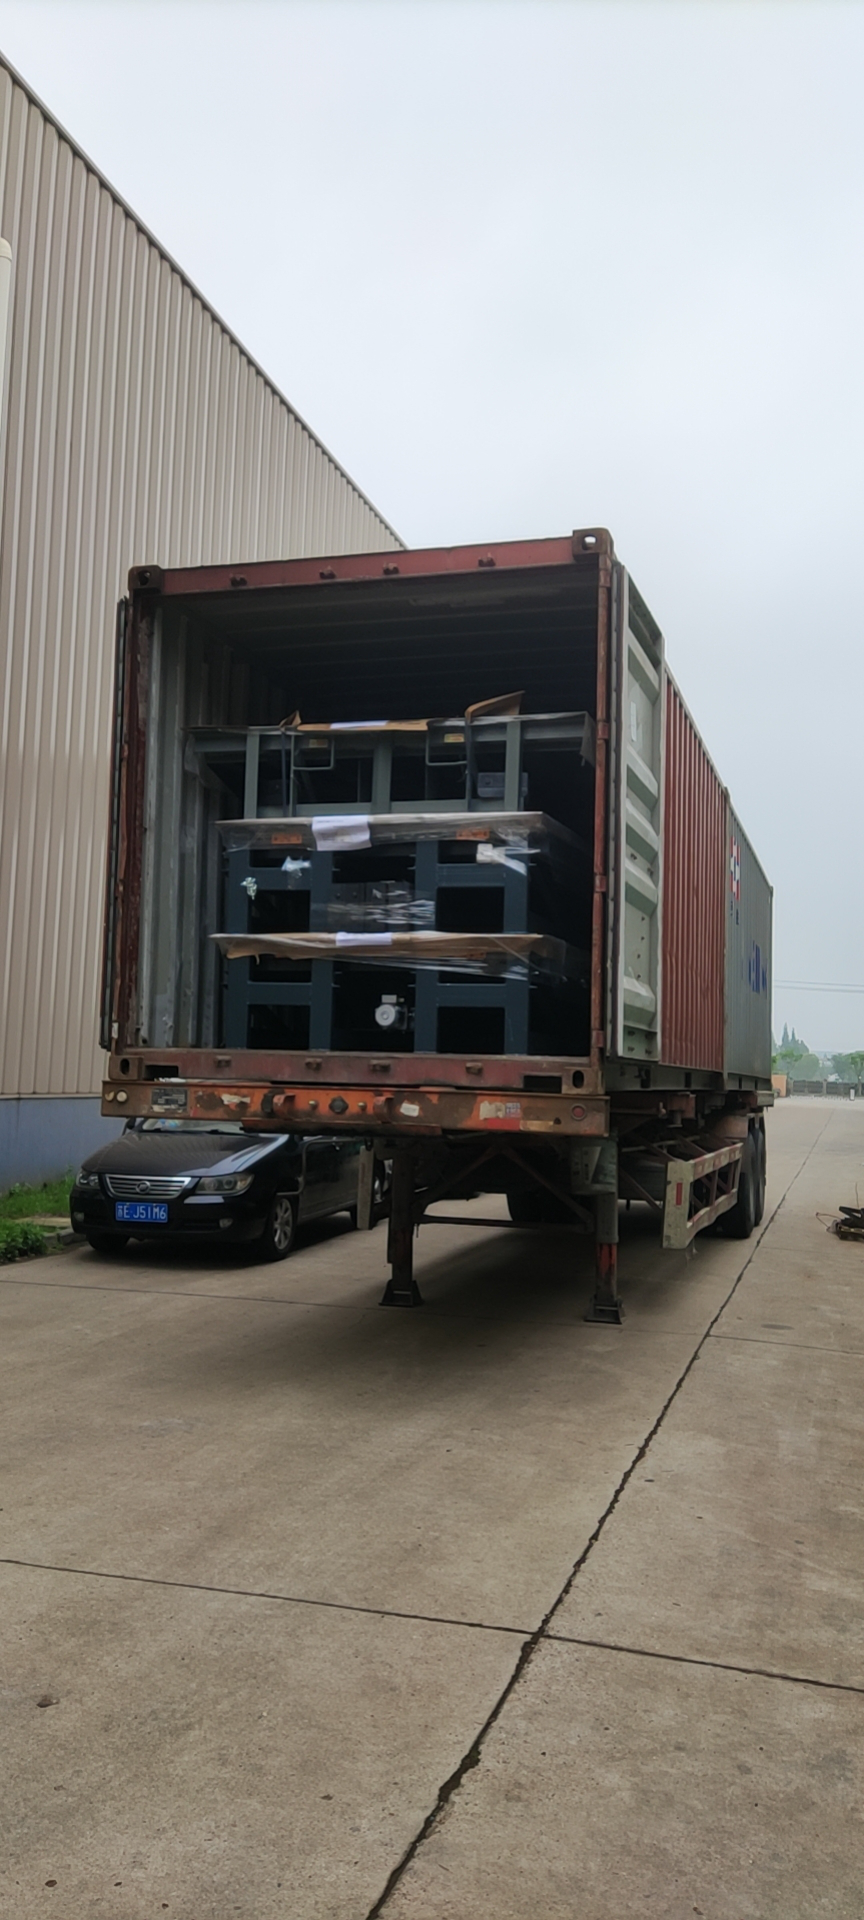 Packing and shipping of hydraulic dock leveler for American customers